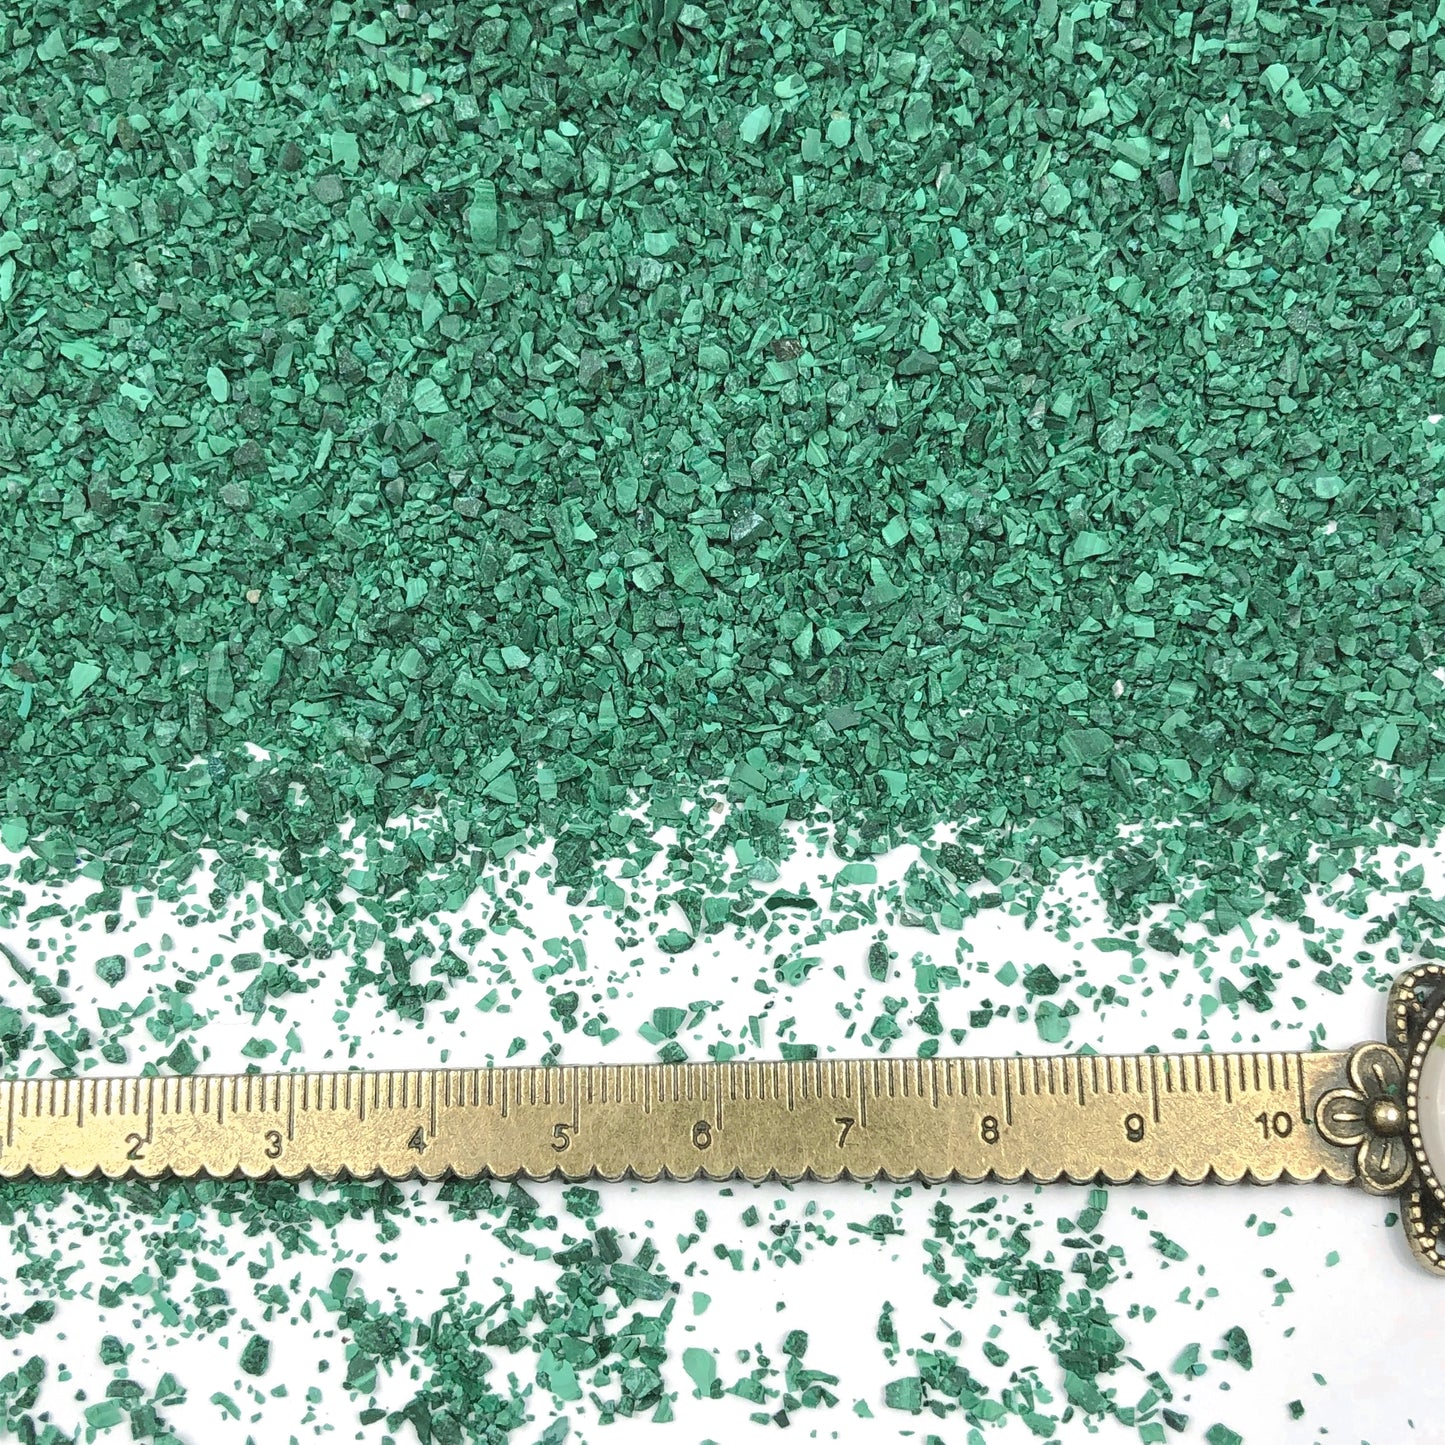 Crushed Green Malachite (Grade A) from the Republic of Congo, Medium Crush, Sand Size, 2mm - 0.25mm